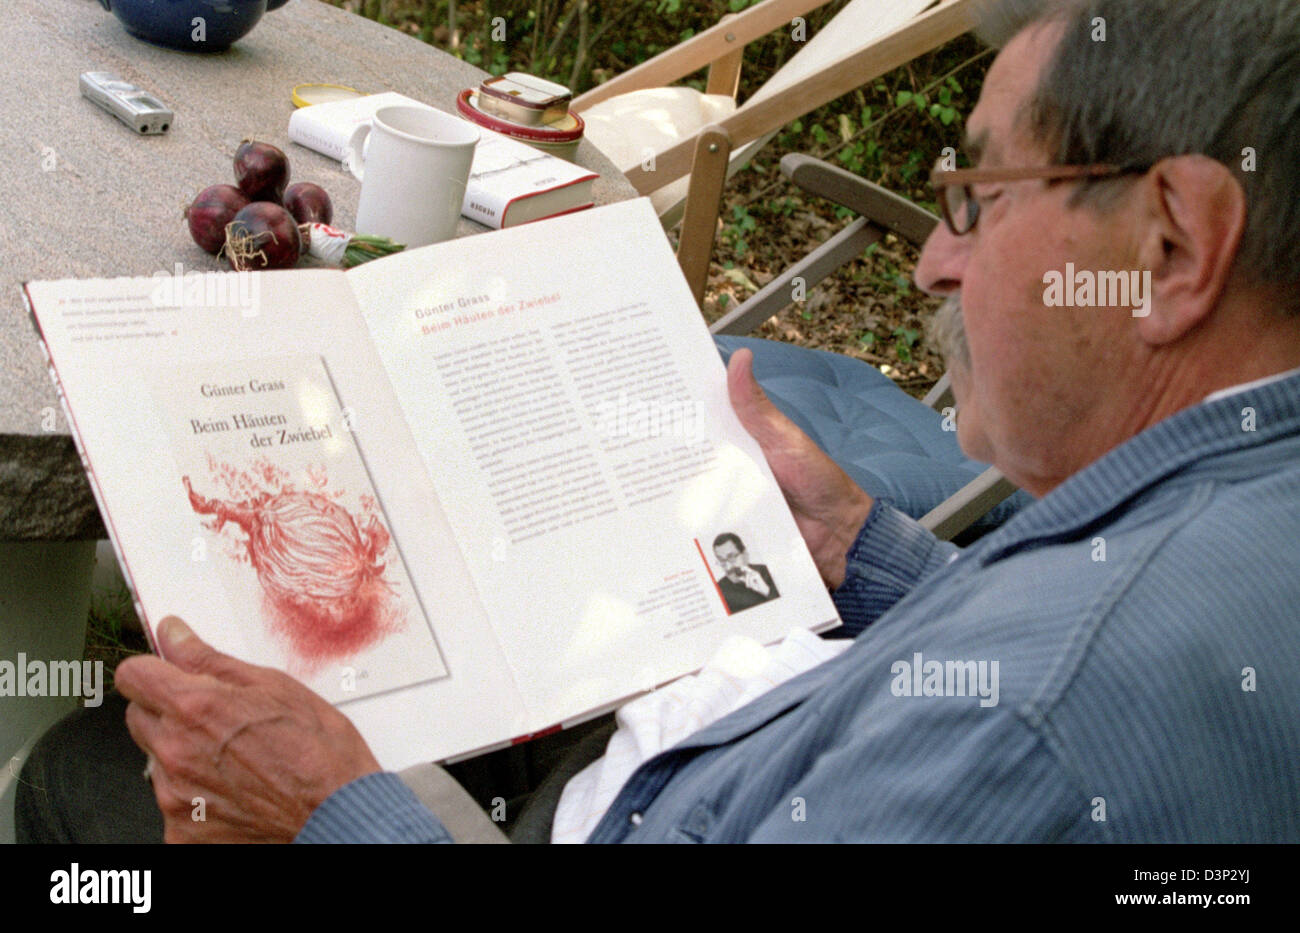 German author and Nobel literature laureate Guenter Grass skims through his autobiography 'Peeling Onions' ('Beim Haeuten der Zwiebel') due to appear in September in his holiday domicile on the island Moehn, Denmark, 5 August 2006. The confession of the 78-year-old having formed part of the Waffen SS during World War II continues to cause a controversial debate. Photo: Matthias Hoe Stock Photo